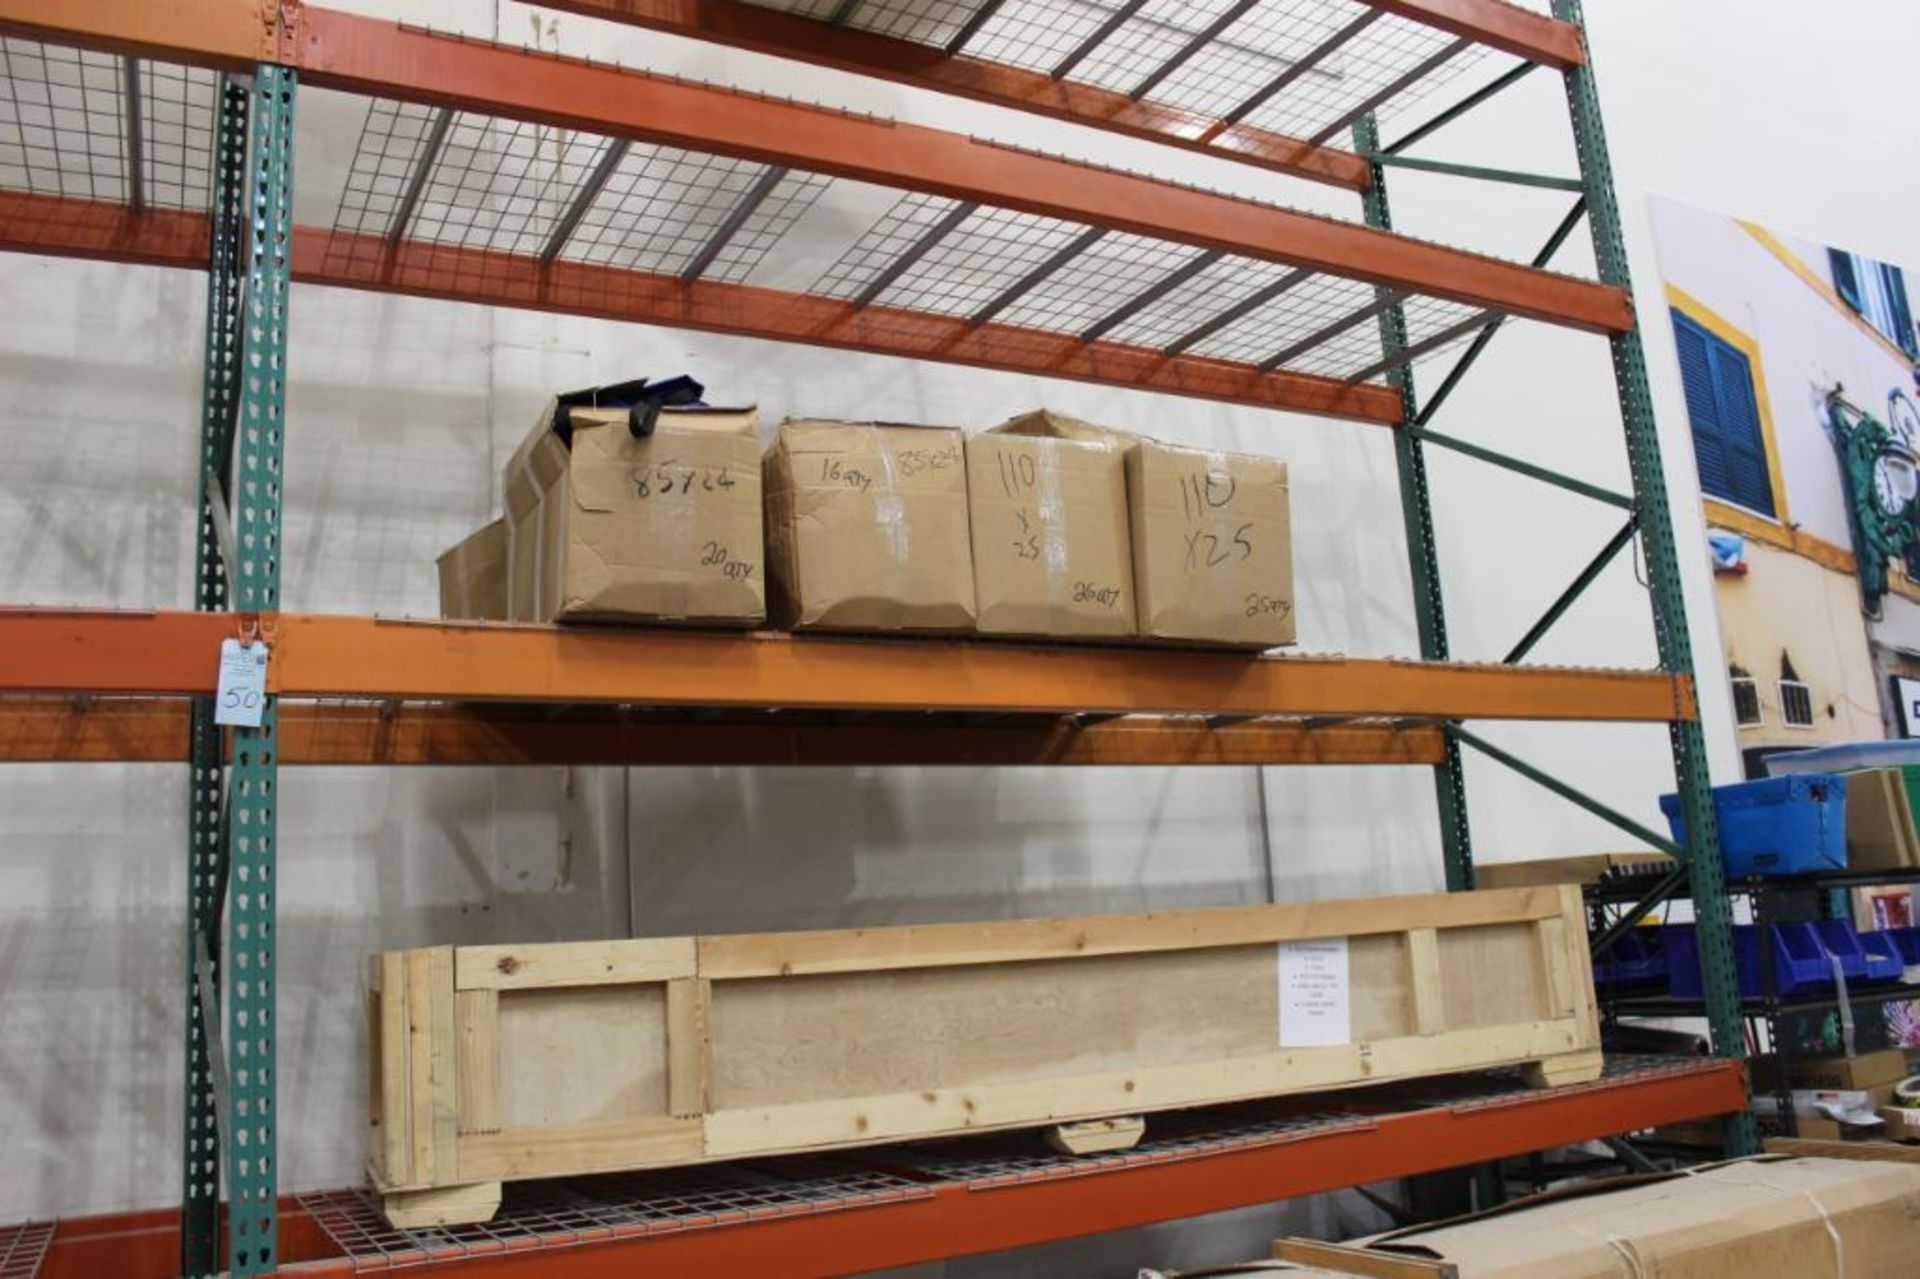 (3)-sections pallet racking 16' x 42” x 13' consisting of (24)-13' crossbars and (4)- 16'x42” uprigh - Image 2 of 4